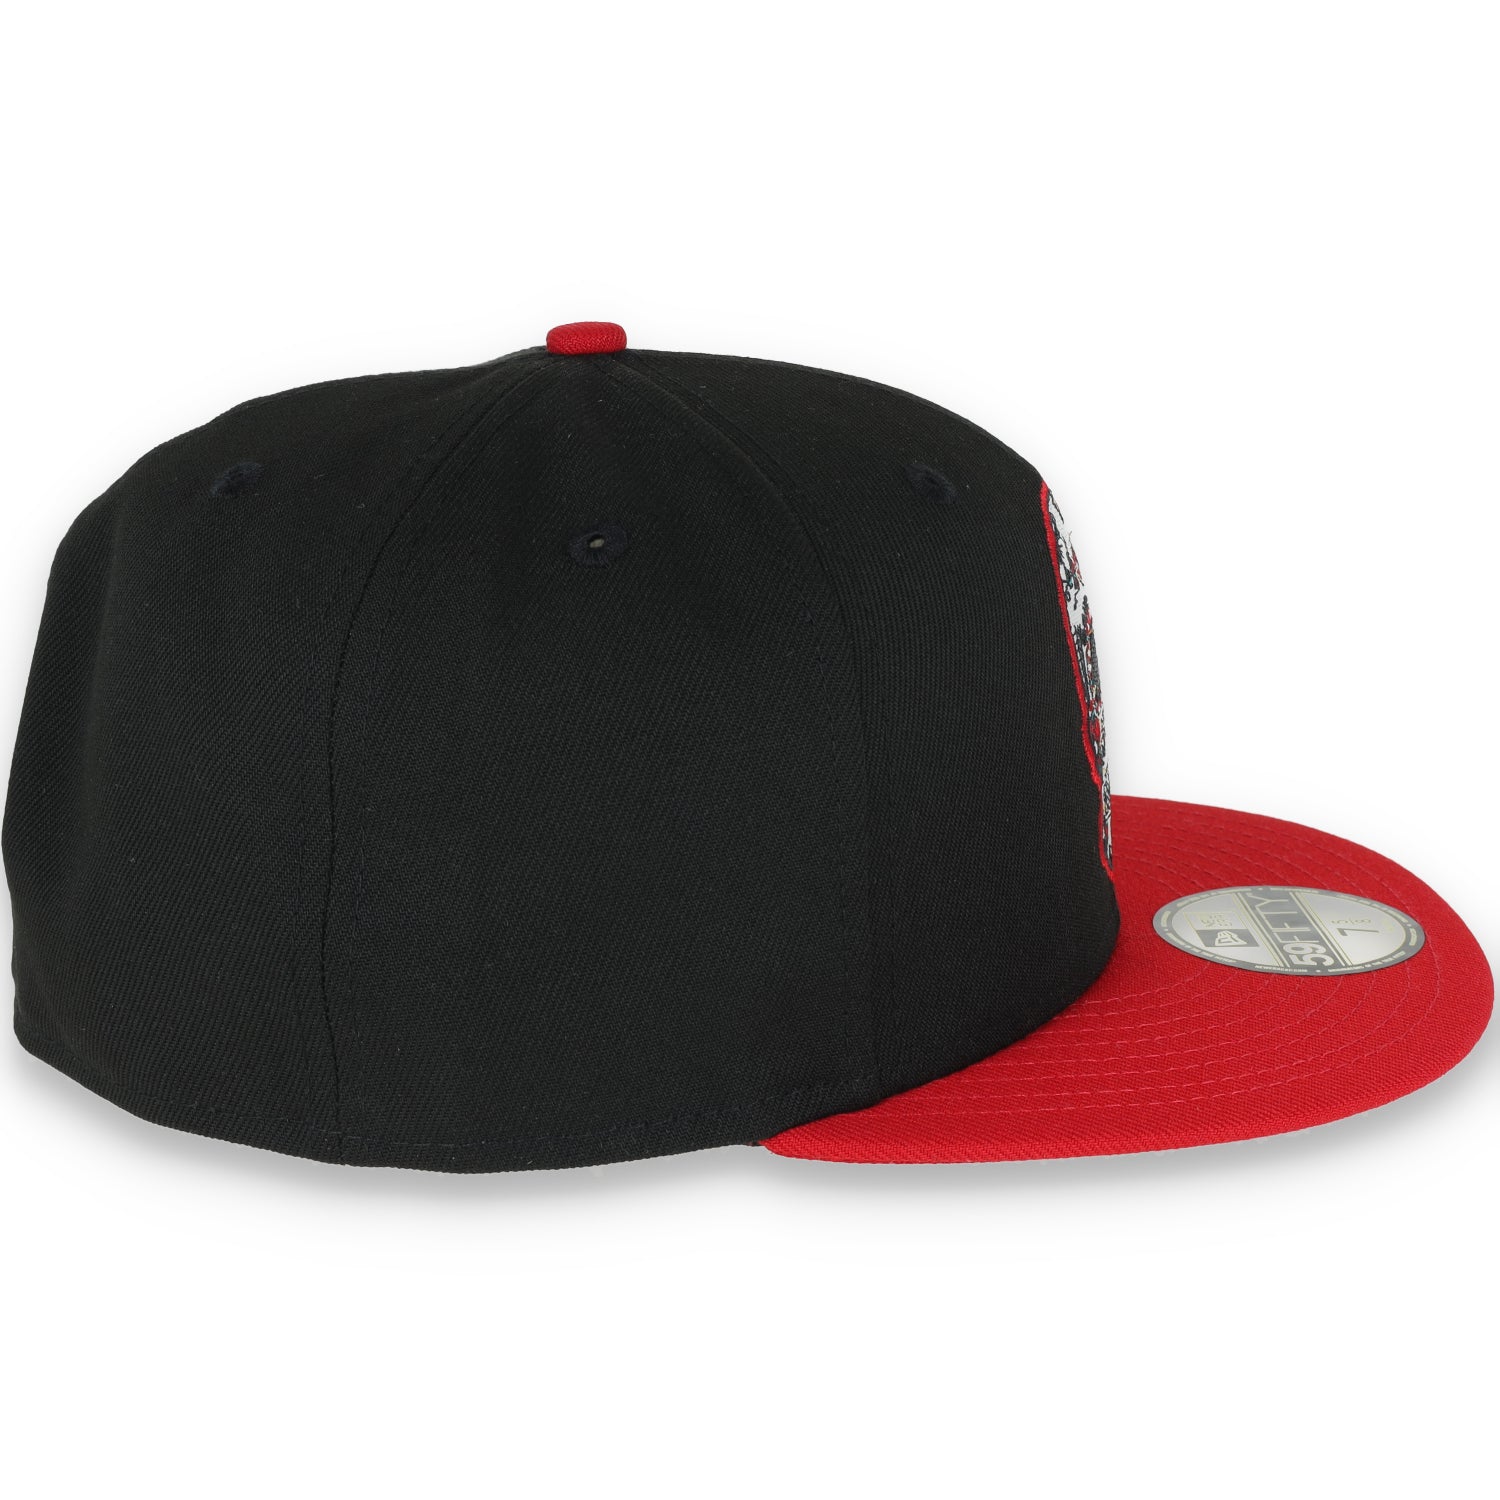 NEW ERA SAN FRANCISCO 49ERS SUGAR SKULL 2-TONE 59FIFTY FITTED HAT-BLACK/Red